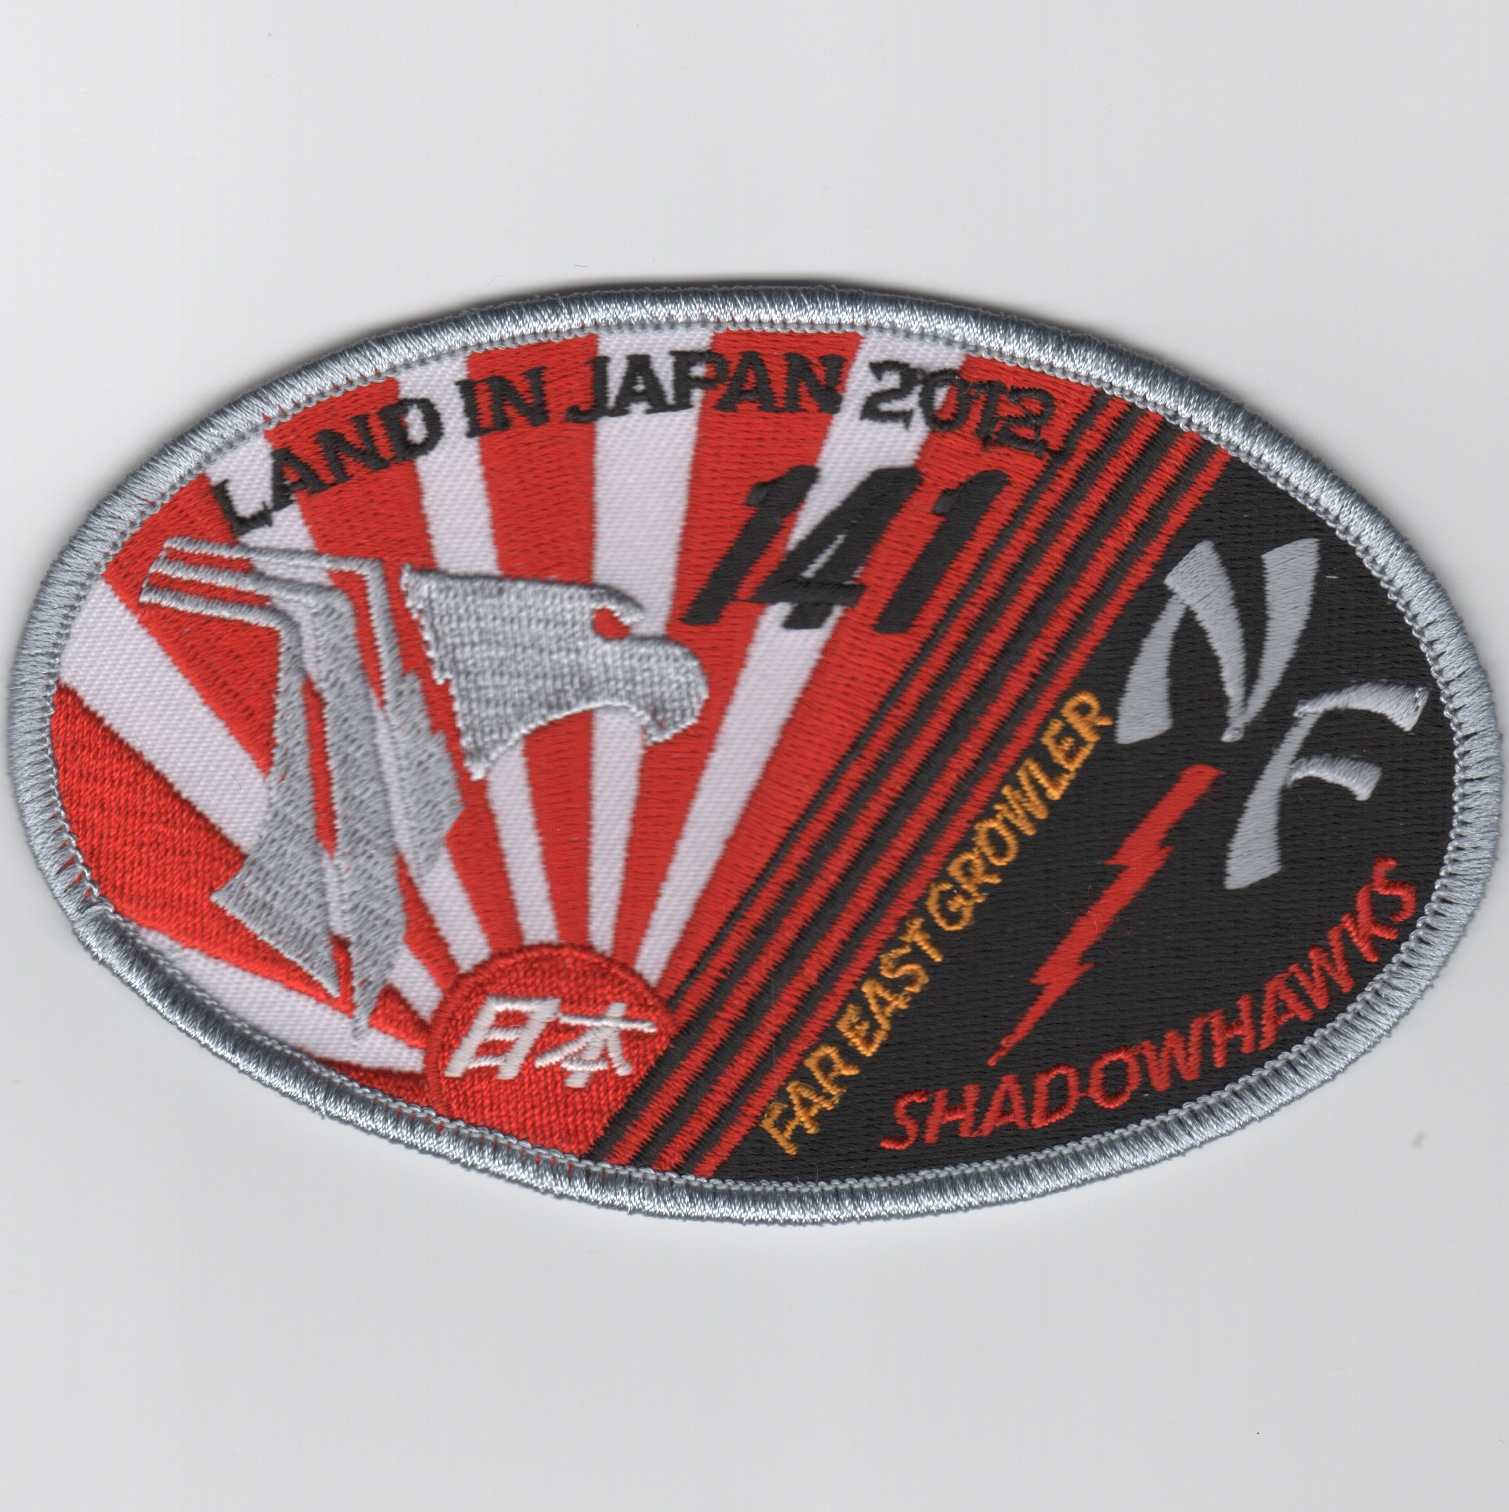 VAQ-141 2012 'Land in Japan' Patch (Oval)